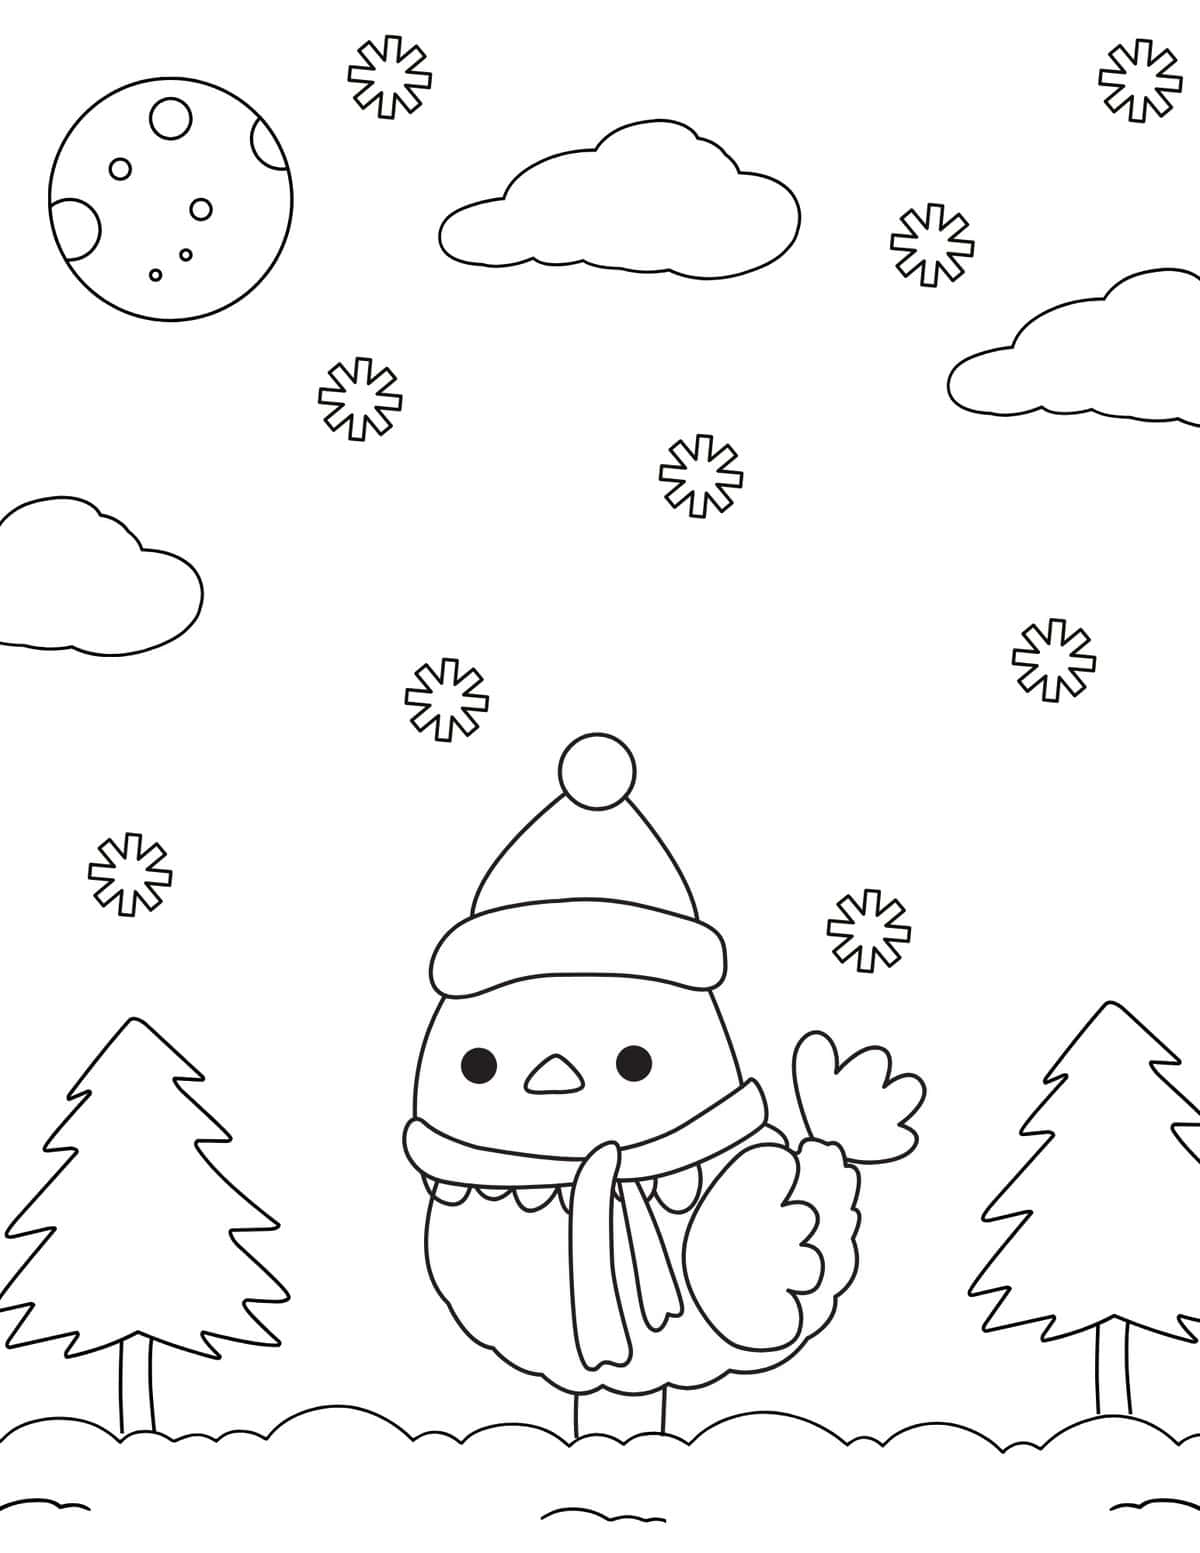 25 Free Winter Coloring Pages for Kids - Prudent Penny Pincher